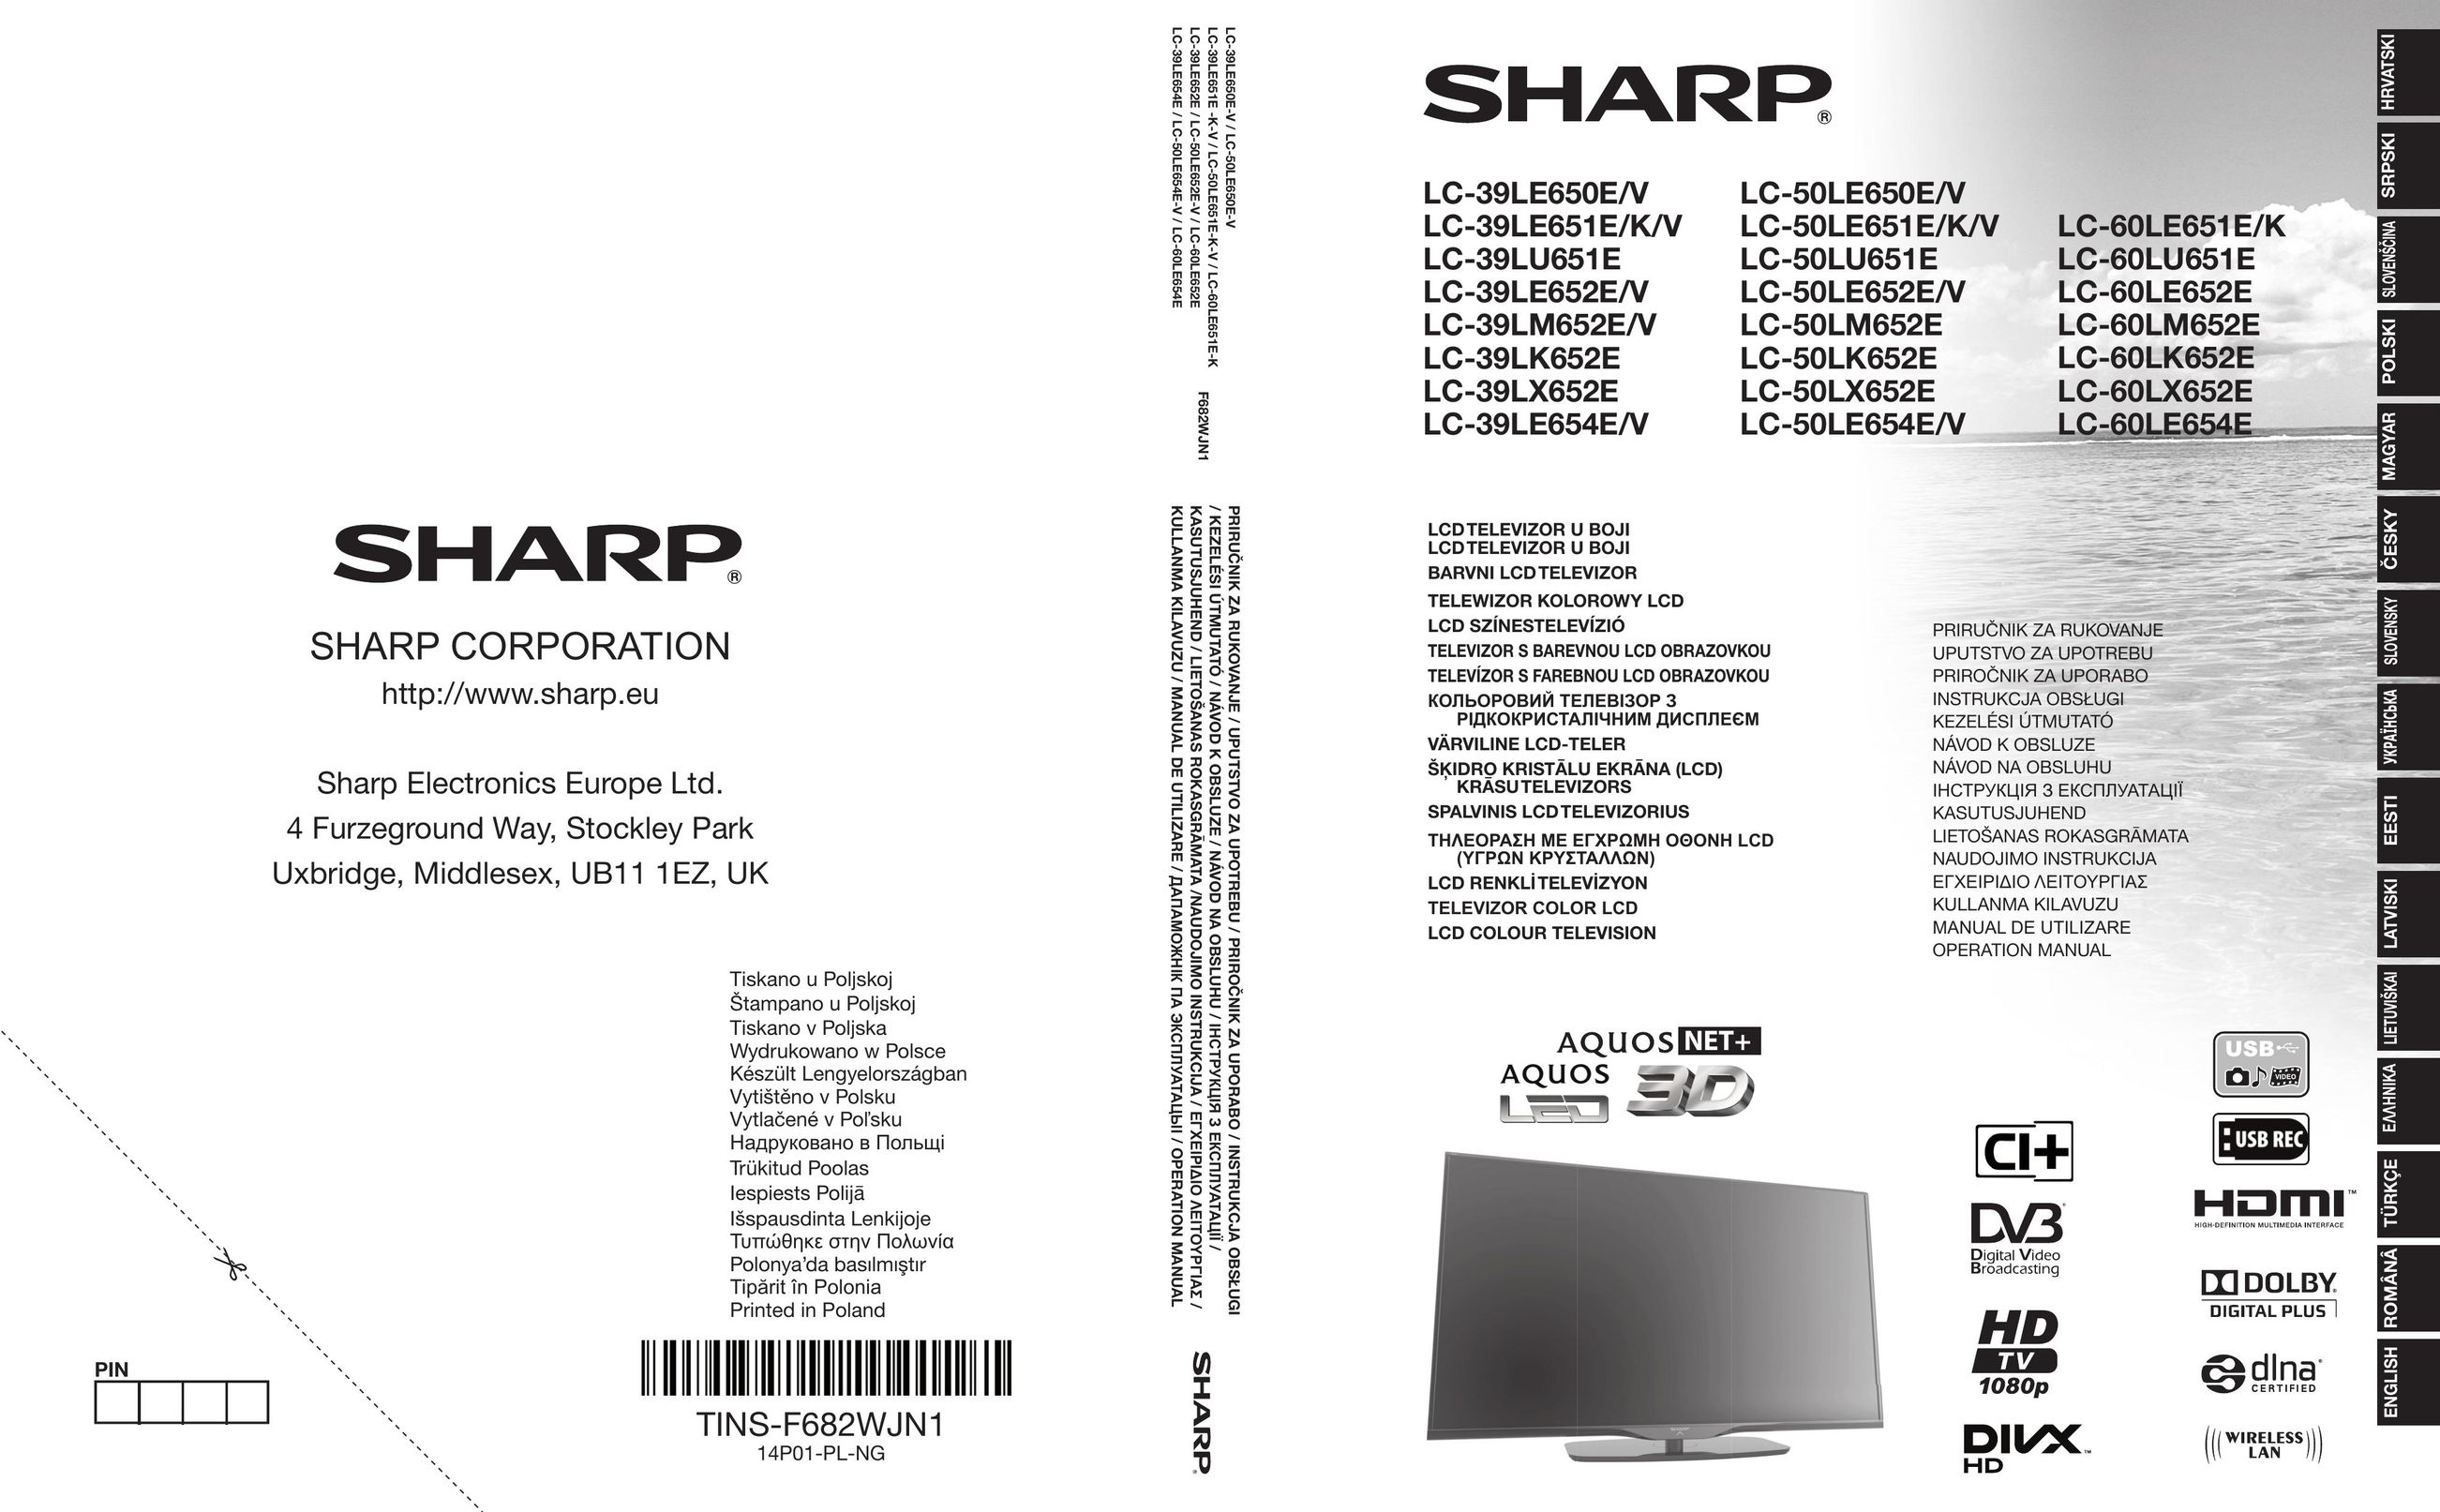 Sharp LC-50LM652E Car Video System User Manual